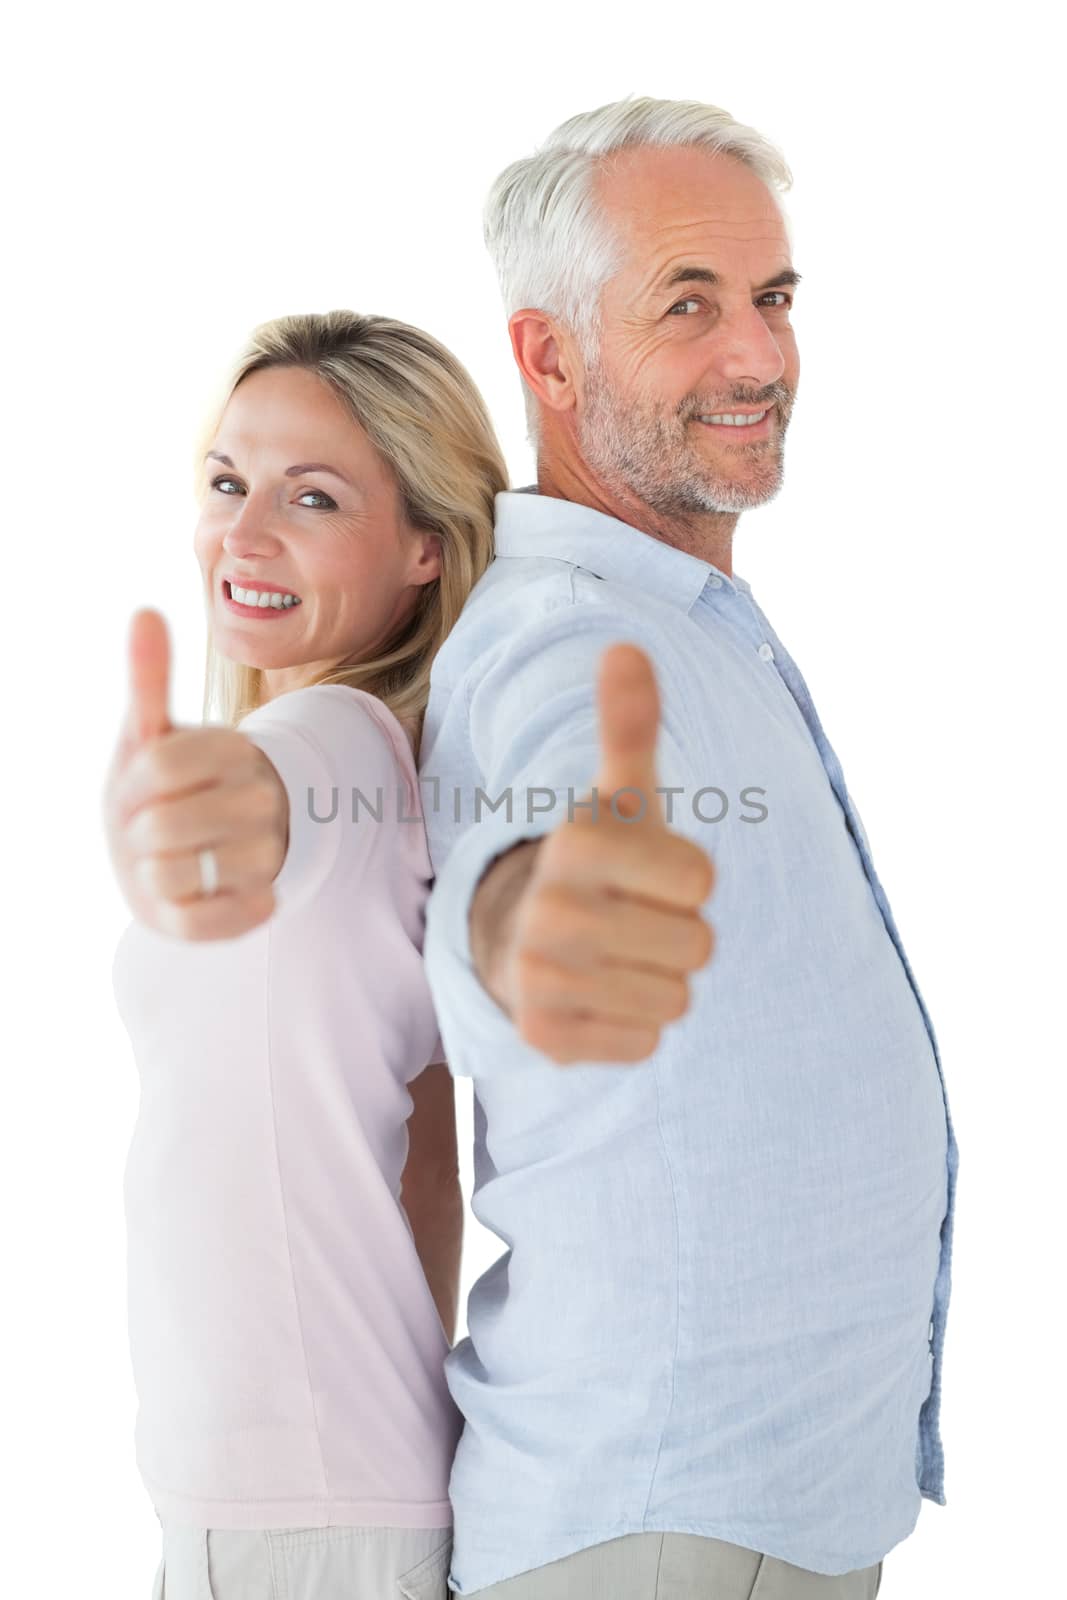 Smiling couple showing thumbs up together by Wavebreakmedia